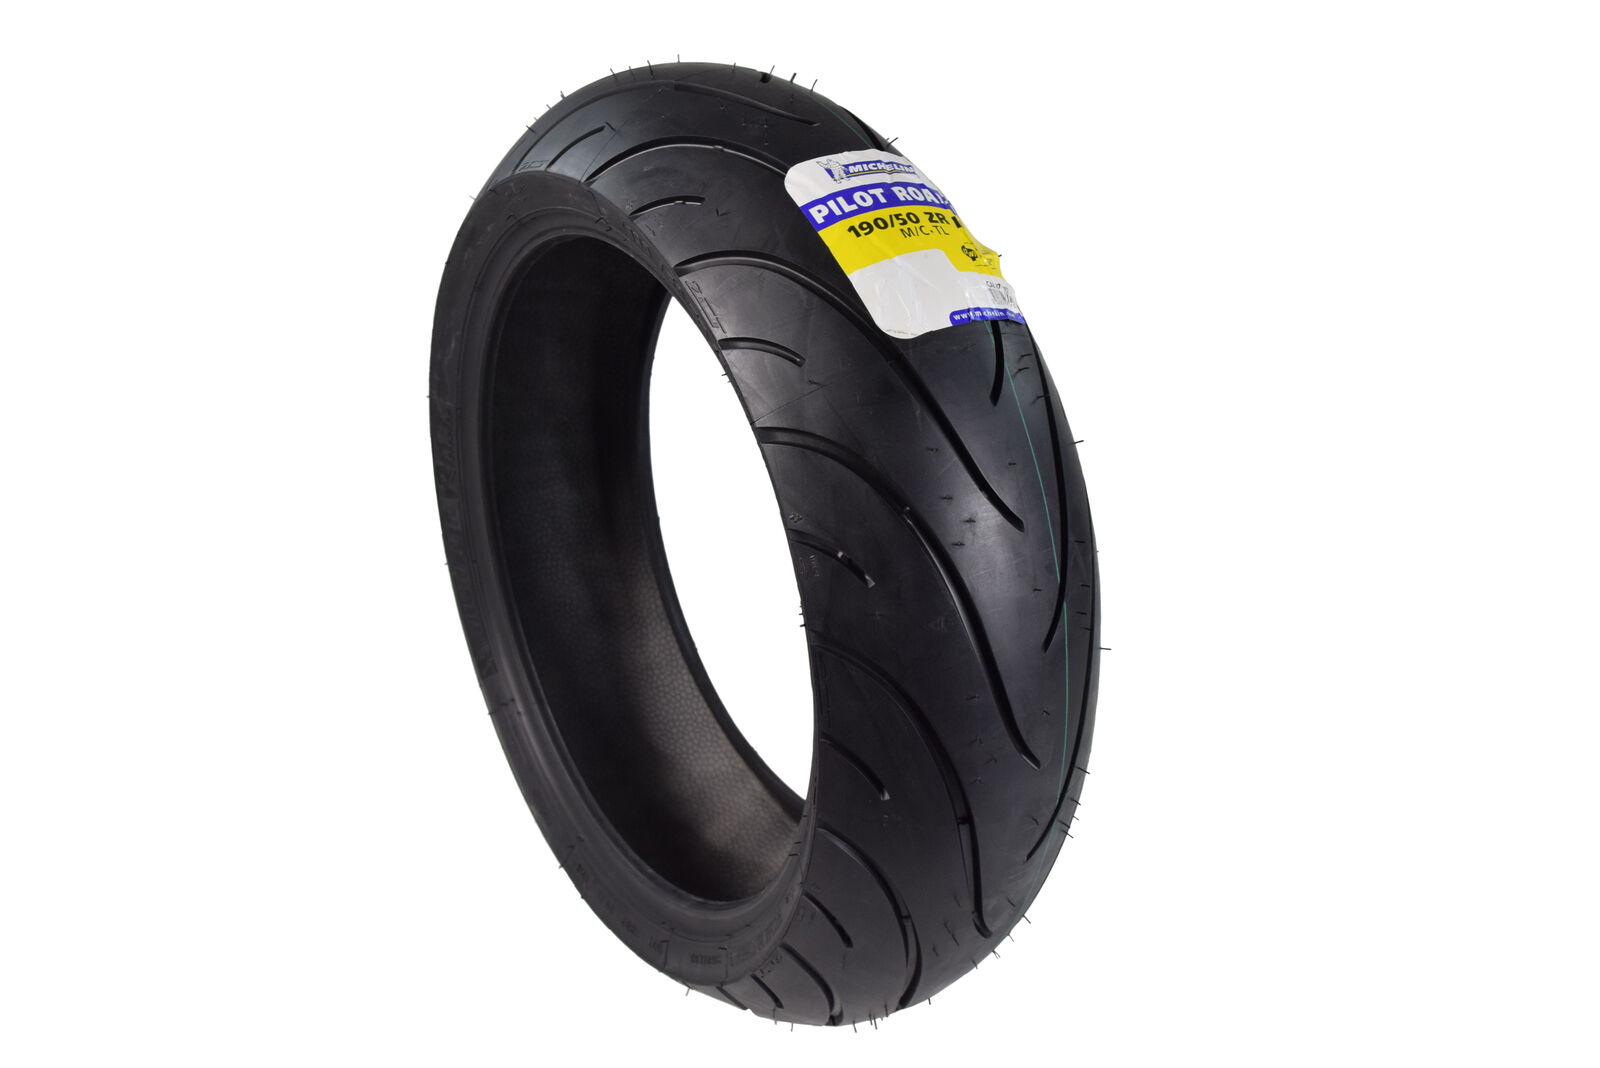 Michelin Road 2 190/50ZR17 Rear Motorcycle Sport Touring Tire 190/50-17